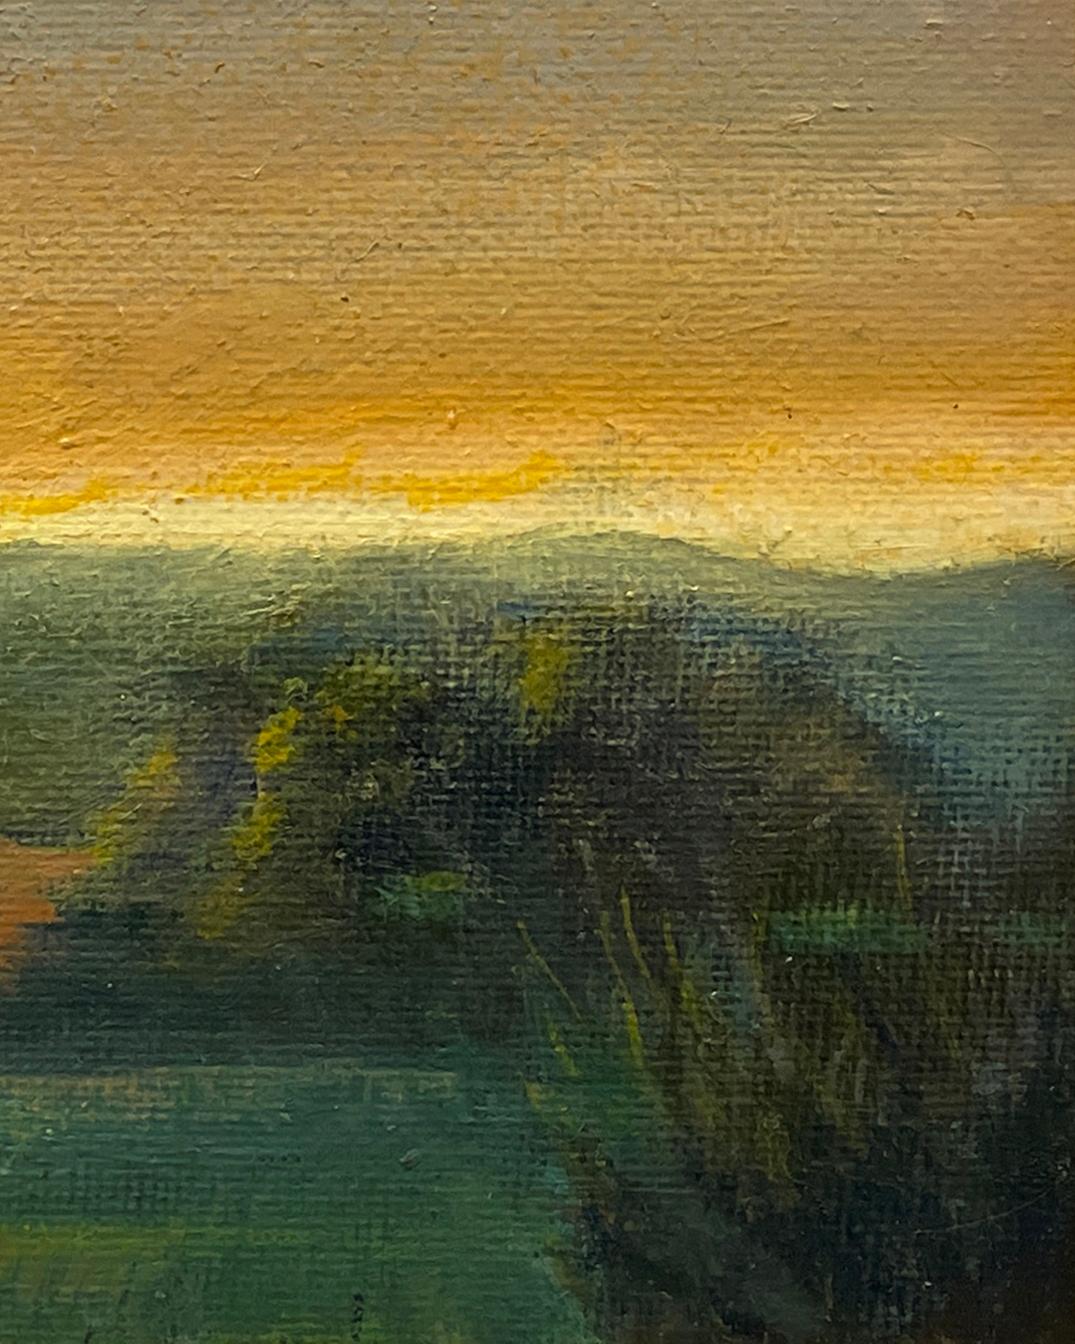 Soft Sky (Landscape of Sun Rising Over Marsh, Influenced by Hudson River School) - Contemporary Painting by Judy Reynolds